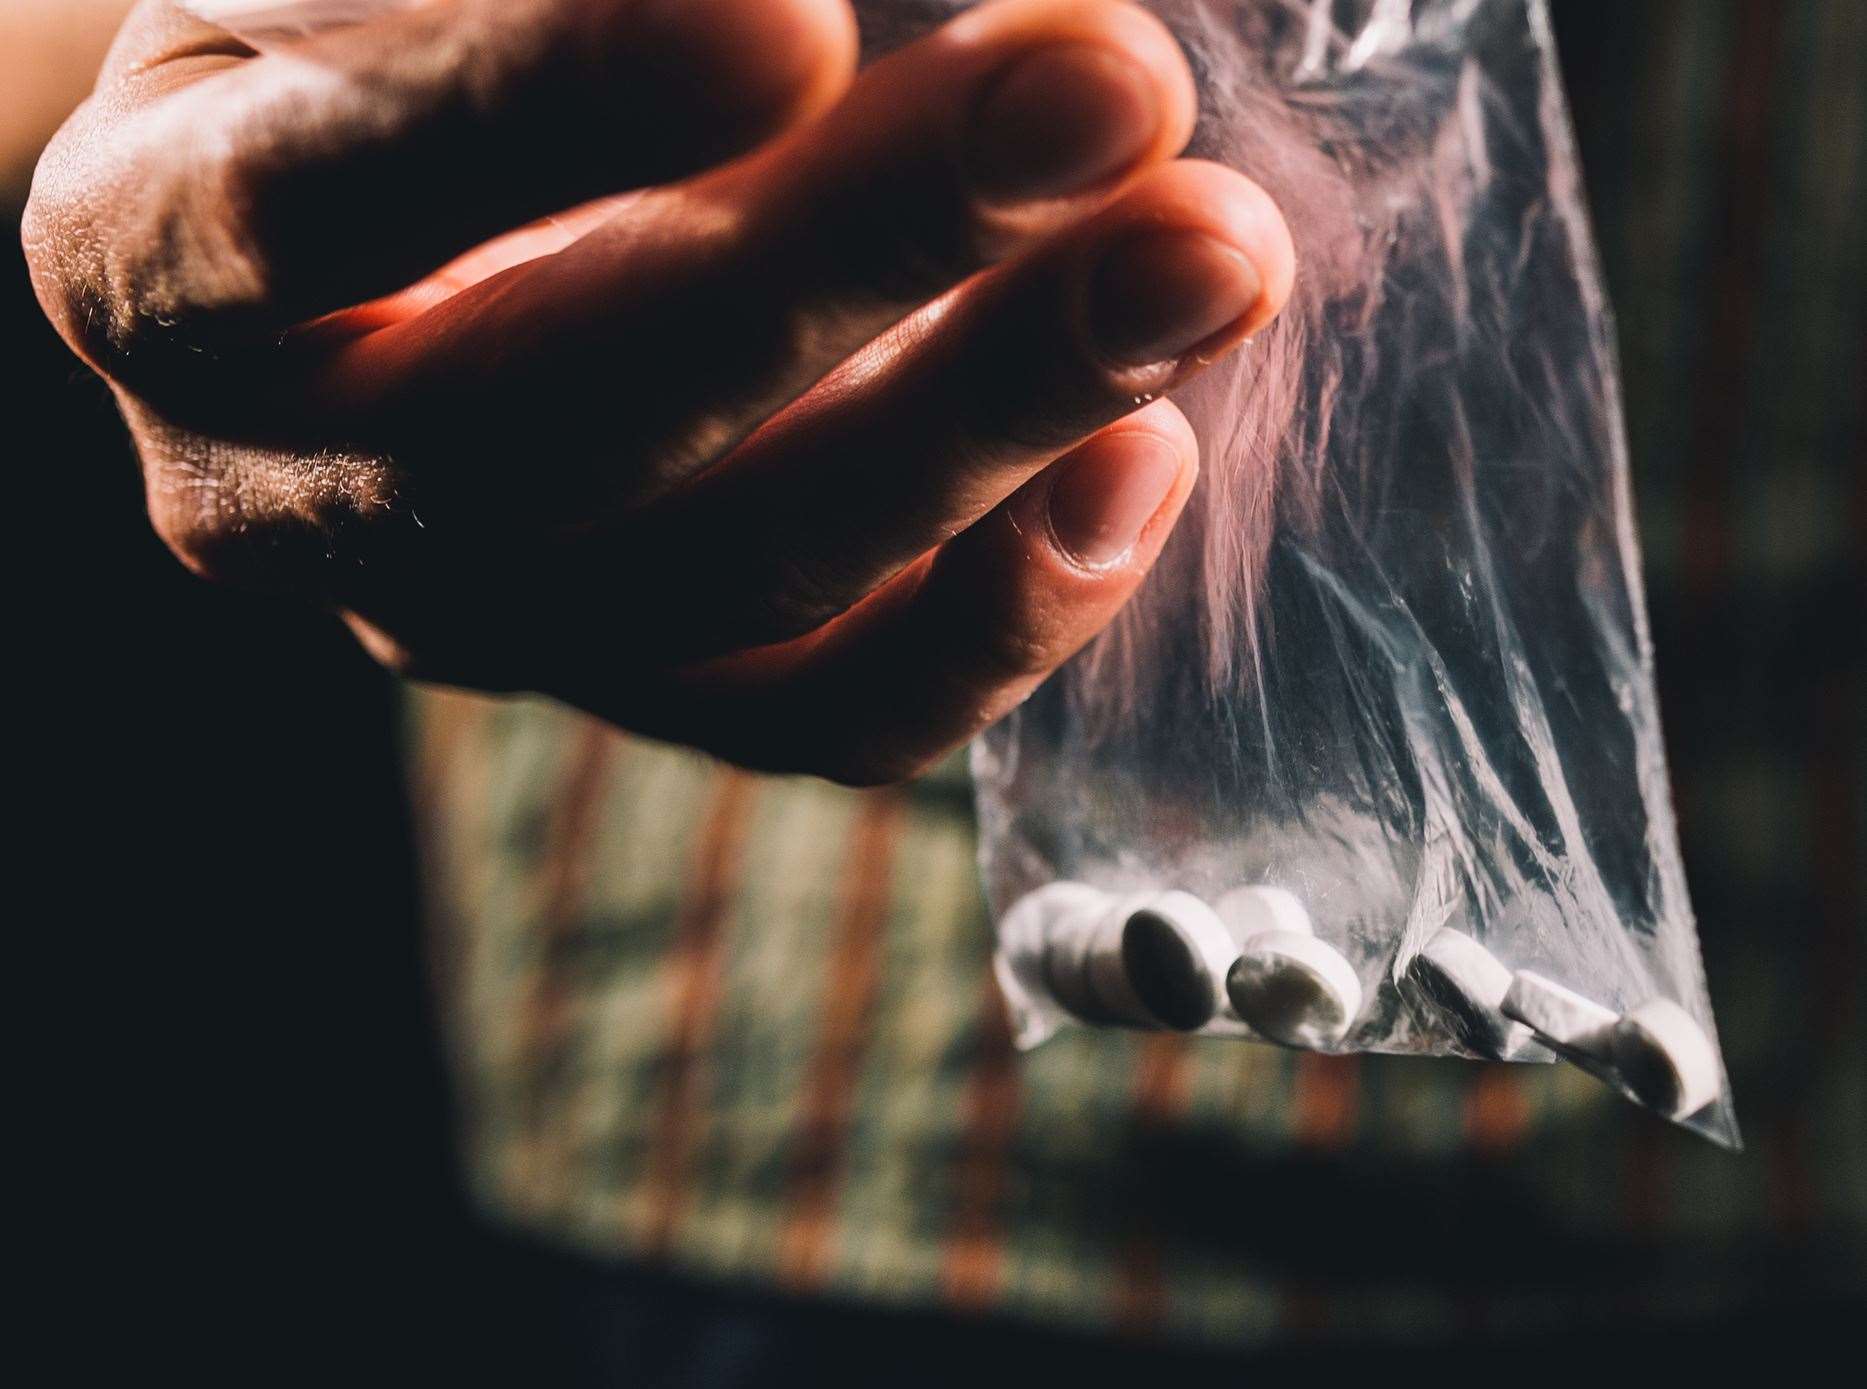 Dealers used the sites to sell a range of drugs. Picture: Getty